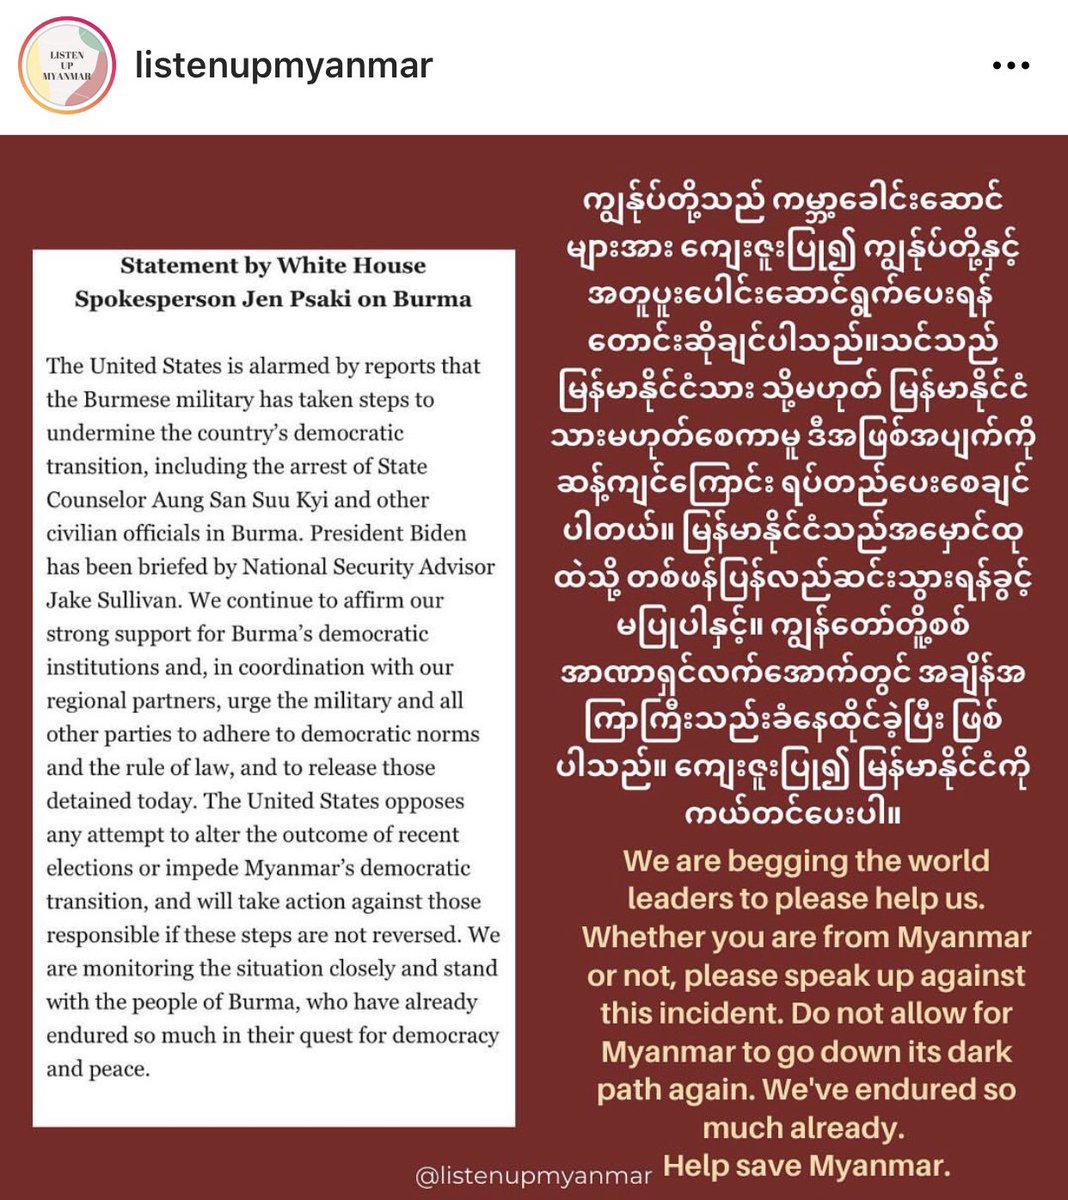 What's currently happening in Myanmar?  #saveMyanmar pls aware this situation.  https://www.instagram.com/p/CKvE0nMFTmD/?igshid=rz3x16716pqy